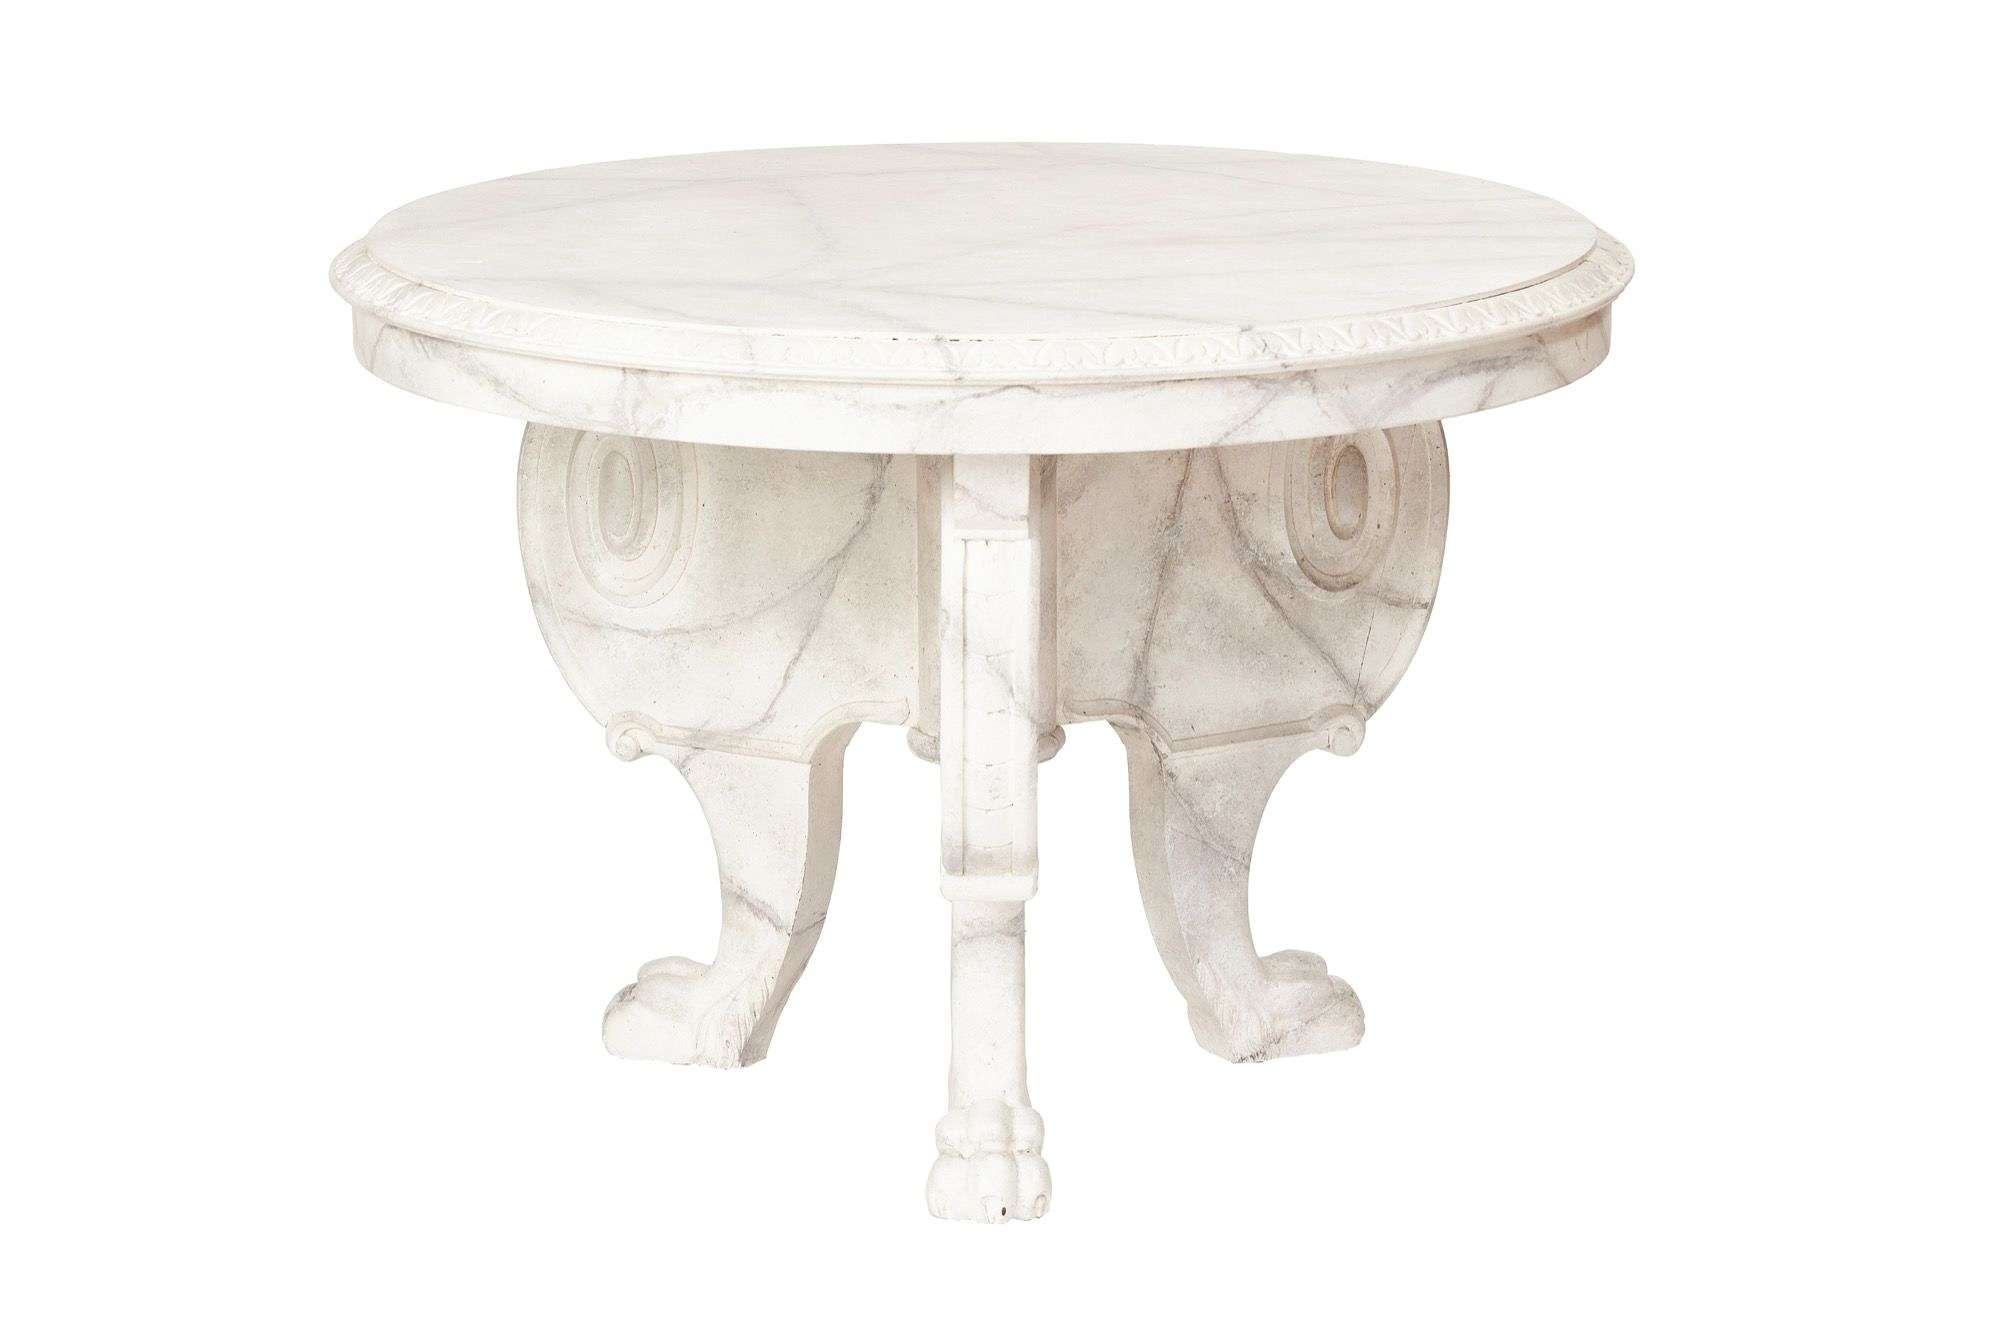 Faux Marble & carved centre table circa 1930s